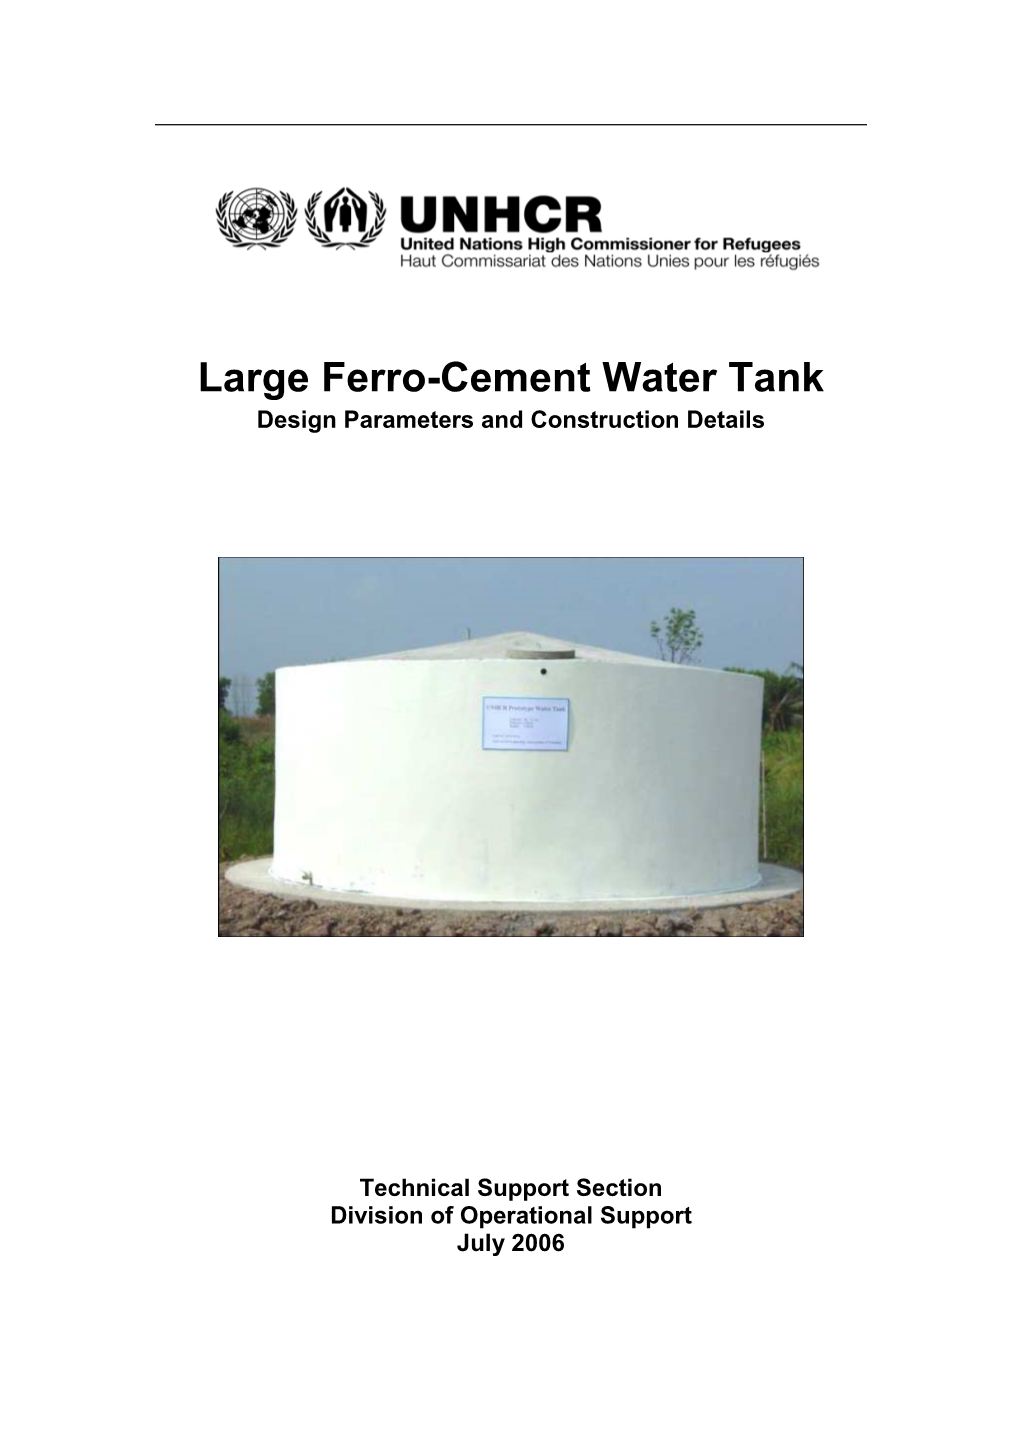 Large Ferro-Cement Water Tank Design Parameters and Construction Details